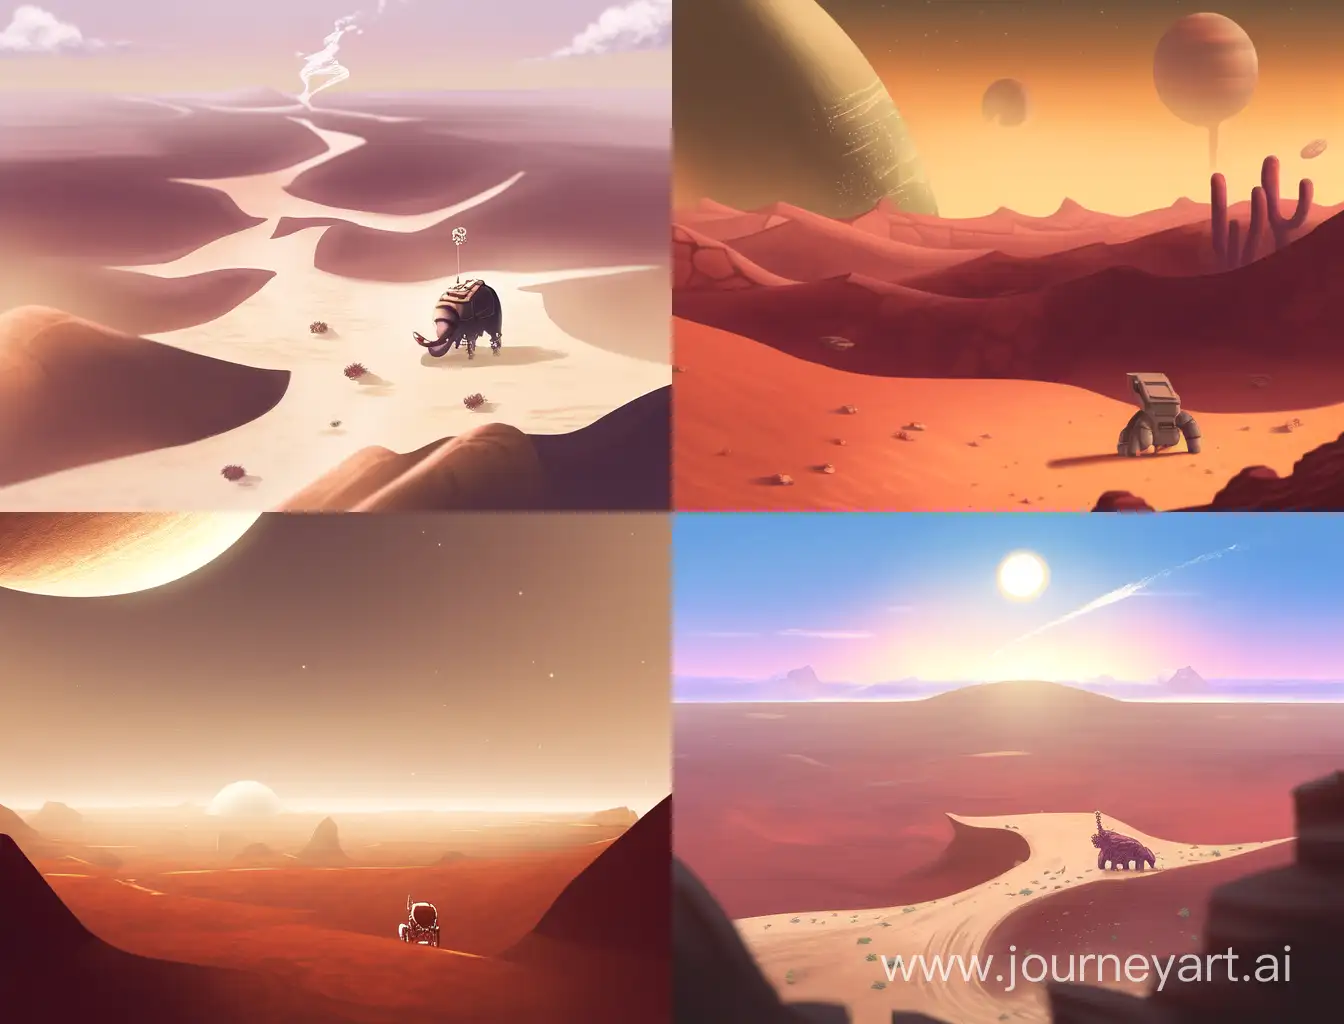 Lonely-Elephant-Roaming-the-Martian-Landscape-Yearning-for-Home